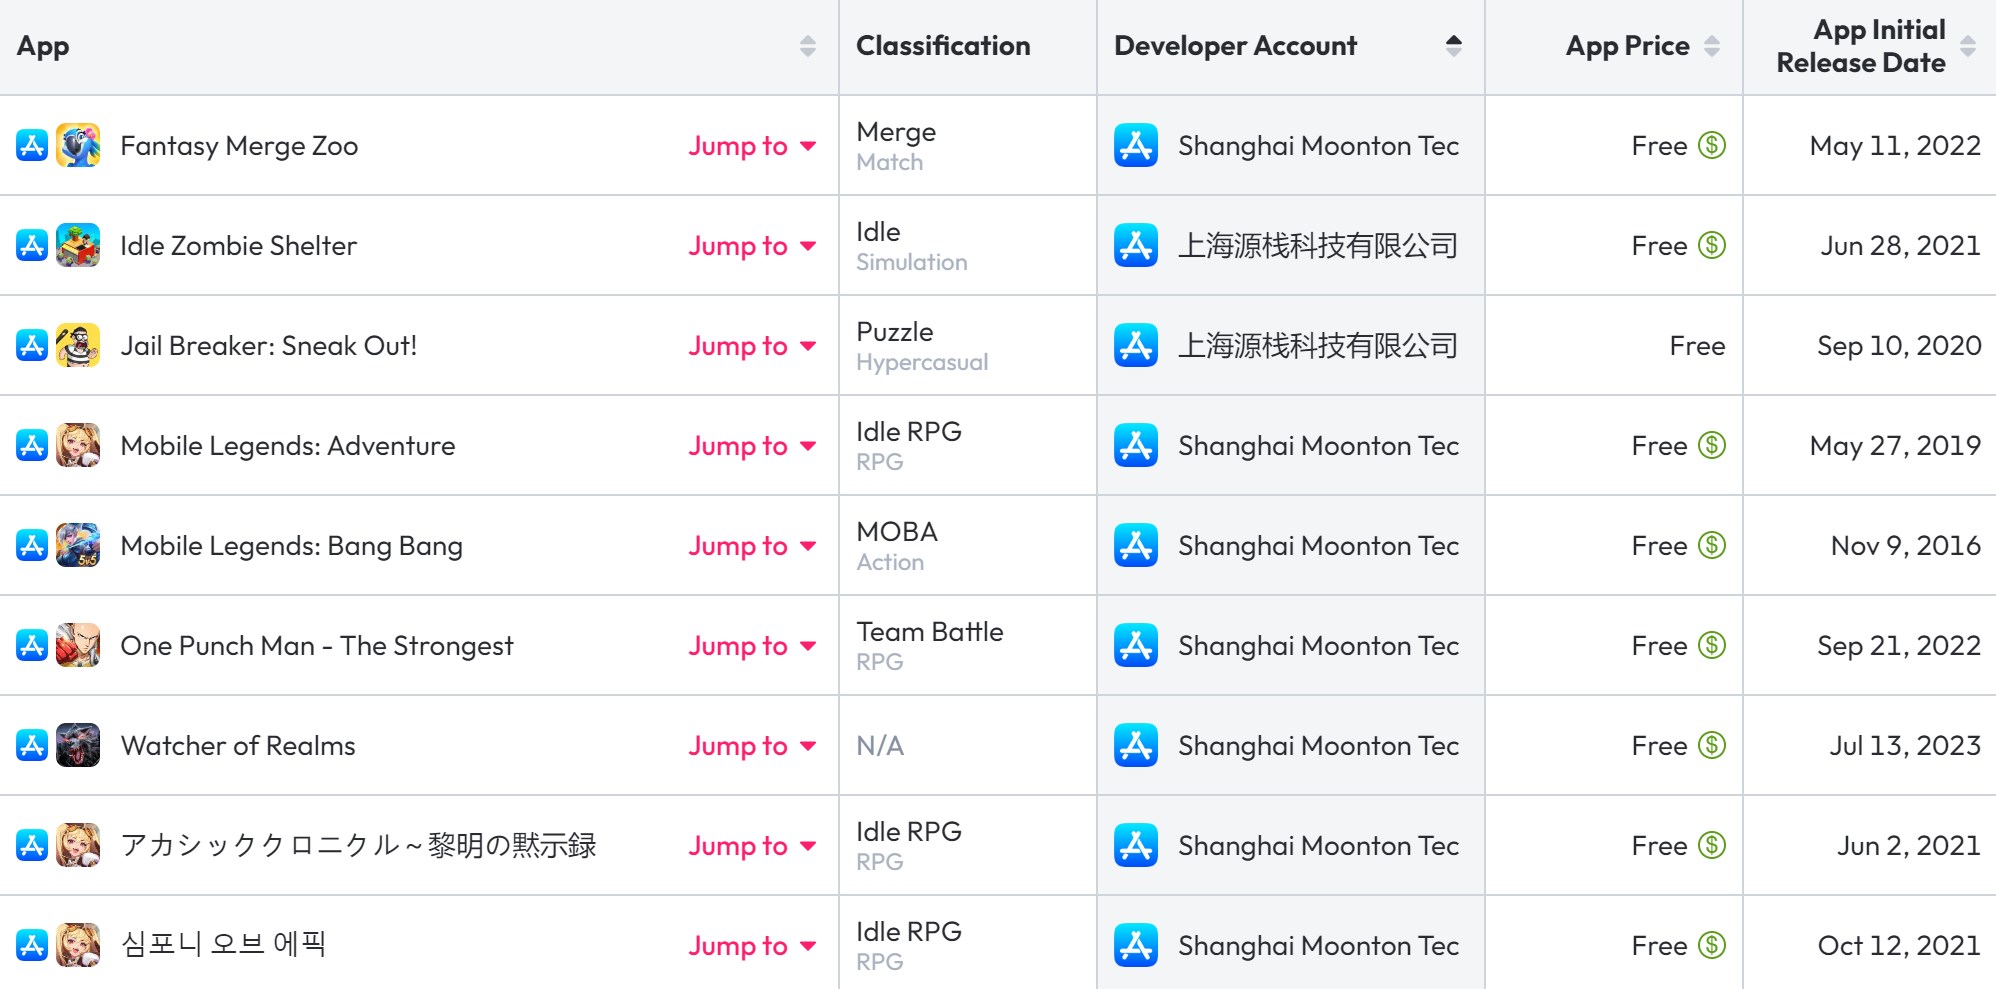 After the success of Mobile Legends: Bang Bang in Southeast Asia, Moonton has embarked on a multi-category global development.